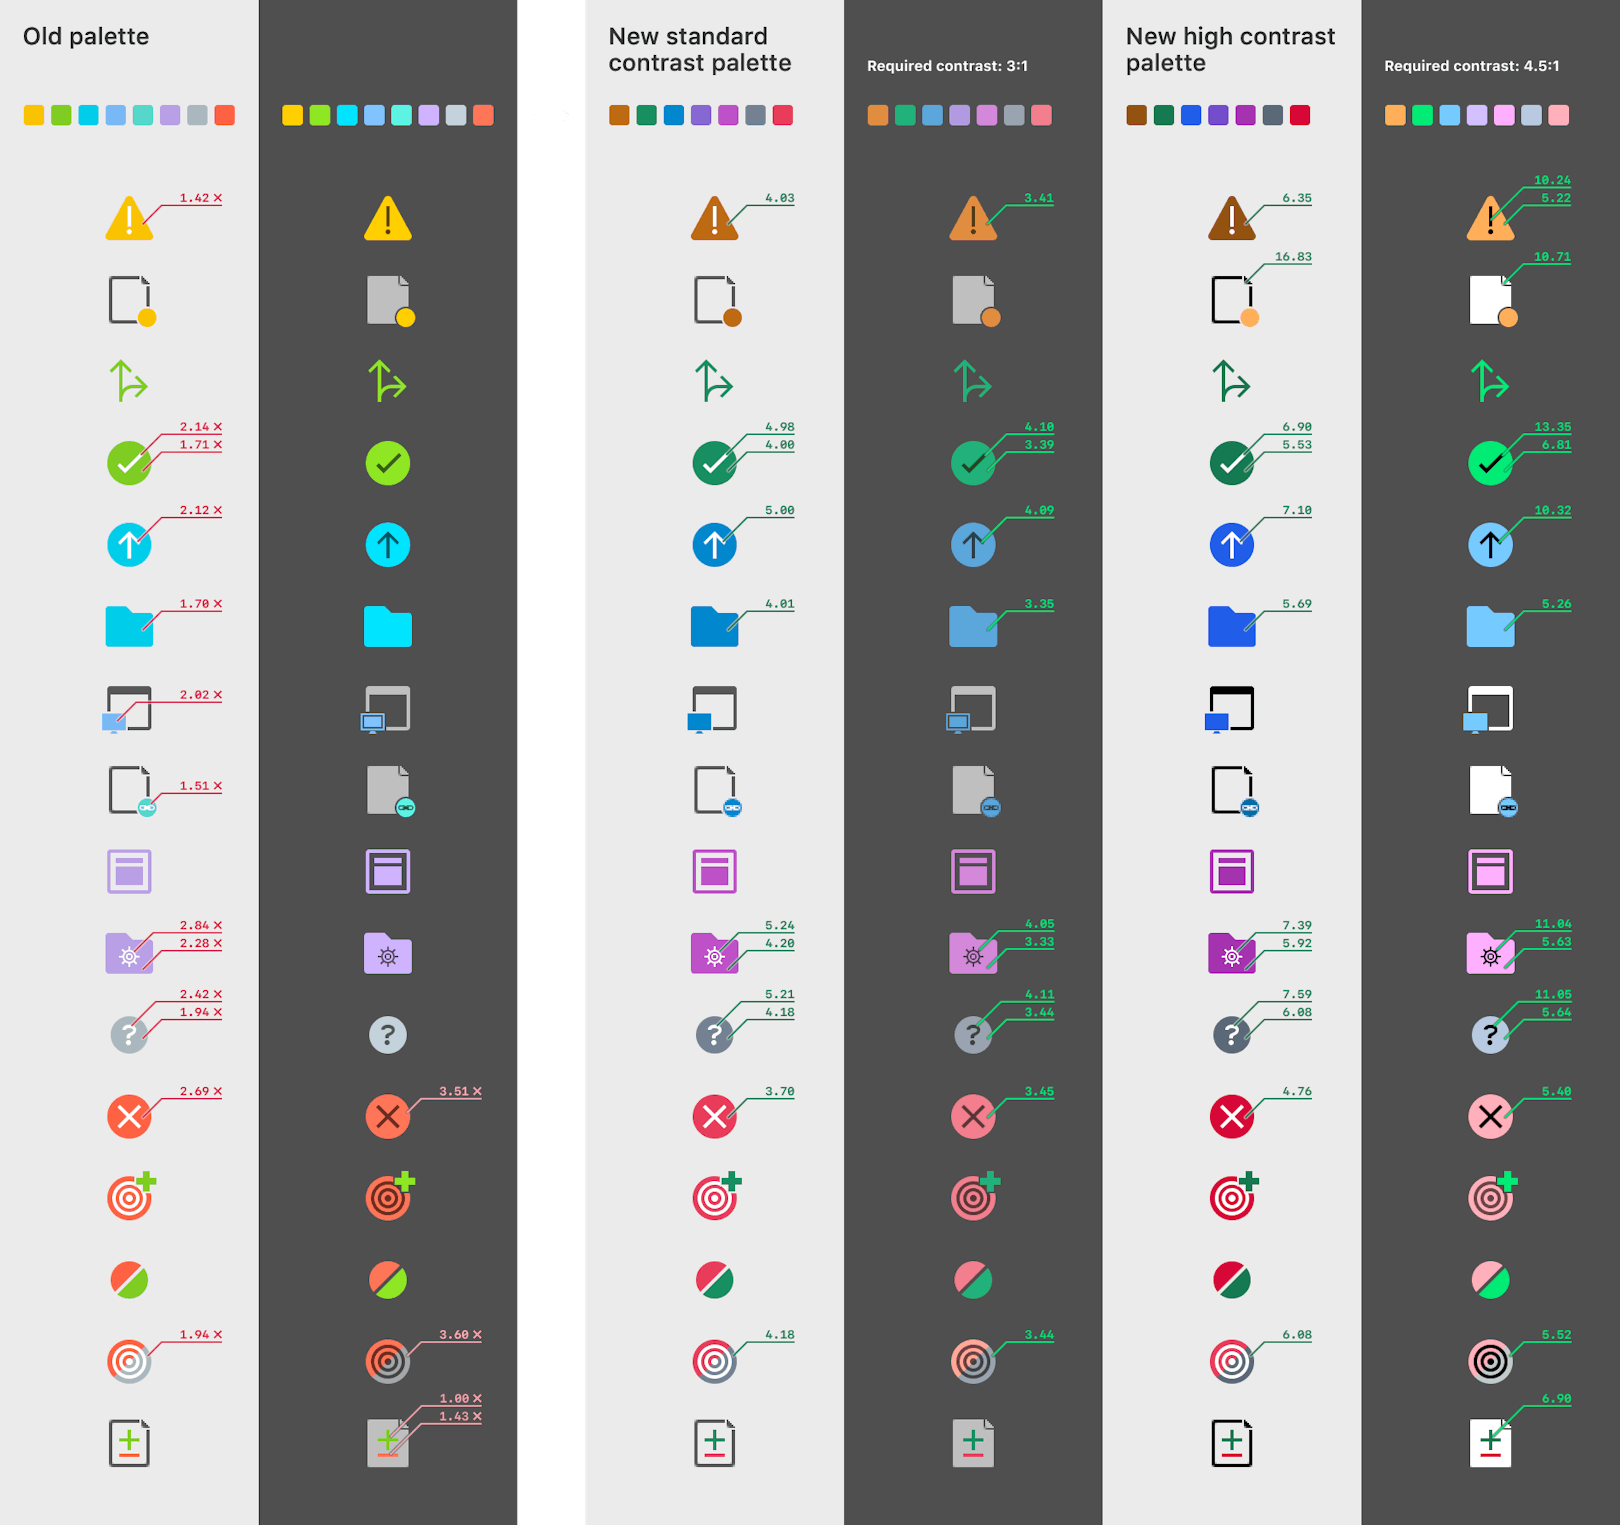 A sheet with many icons rendered in the old and new palettes, with contrast ratios between the background and foreground.